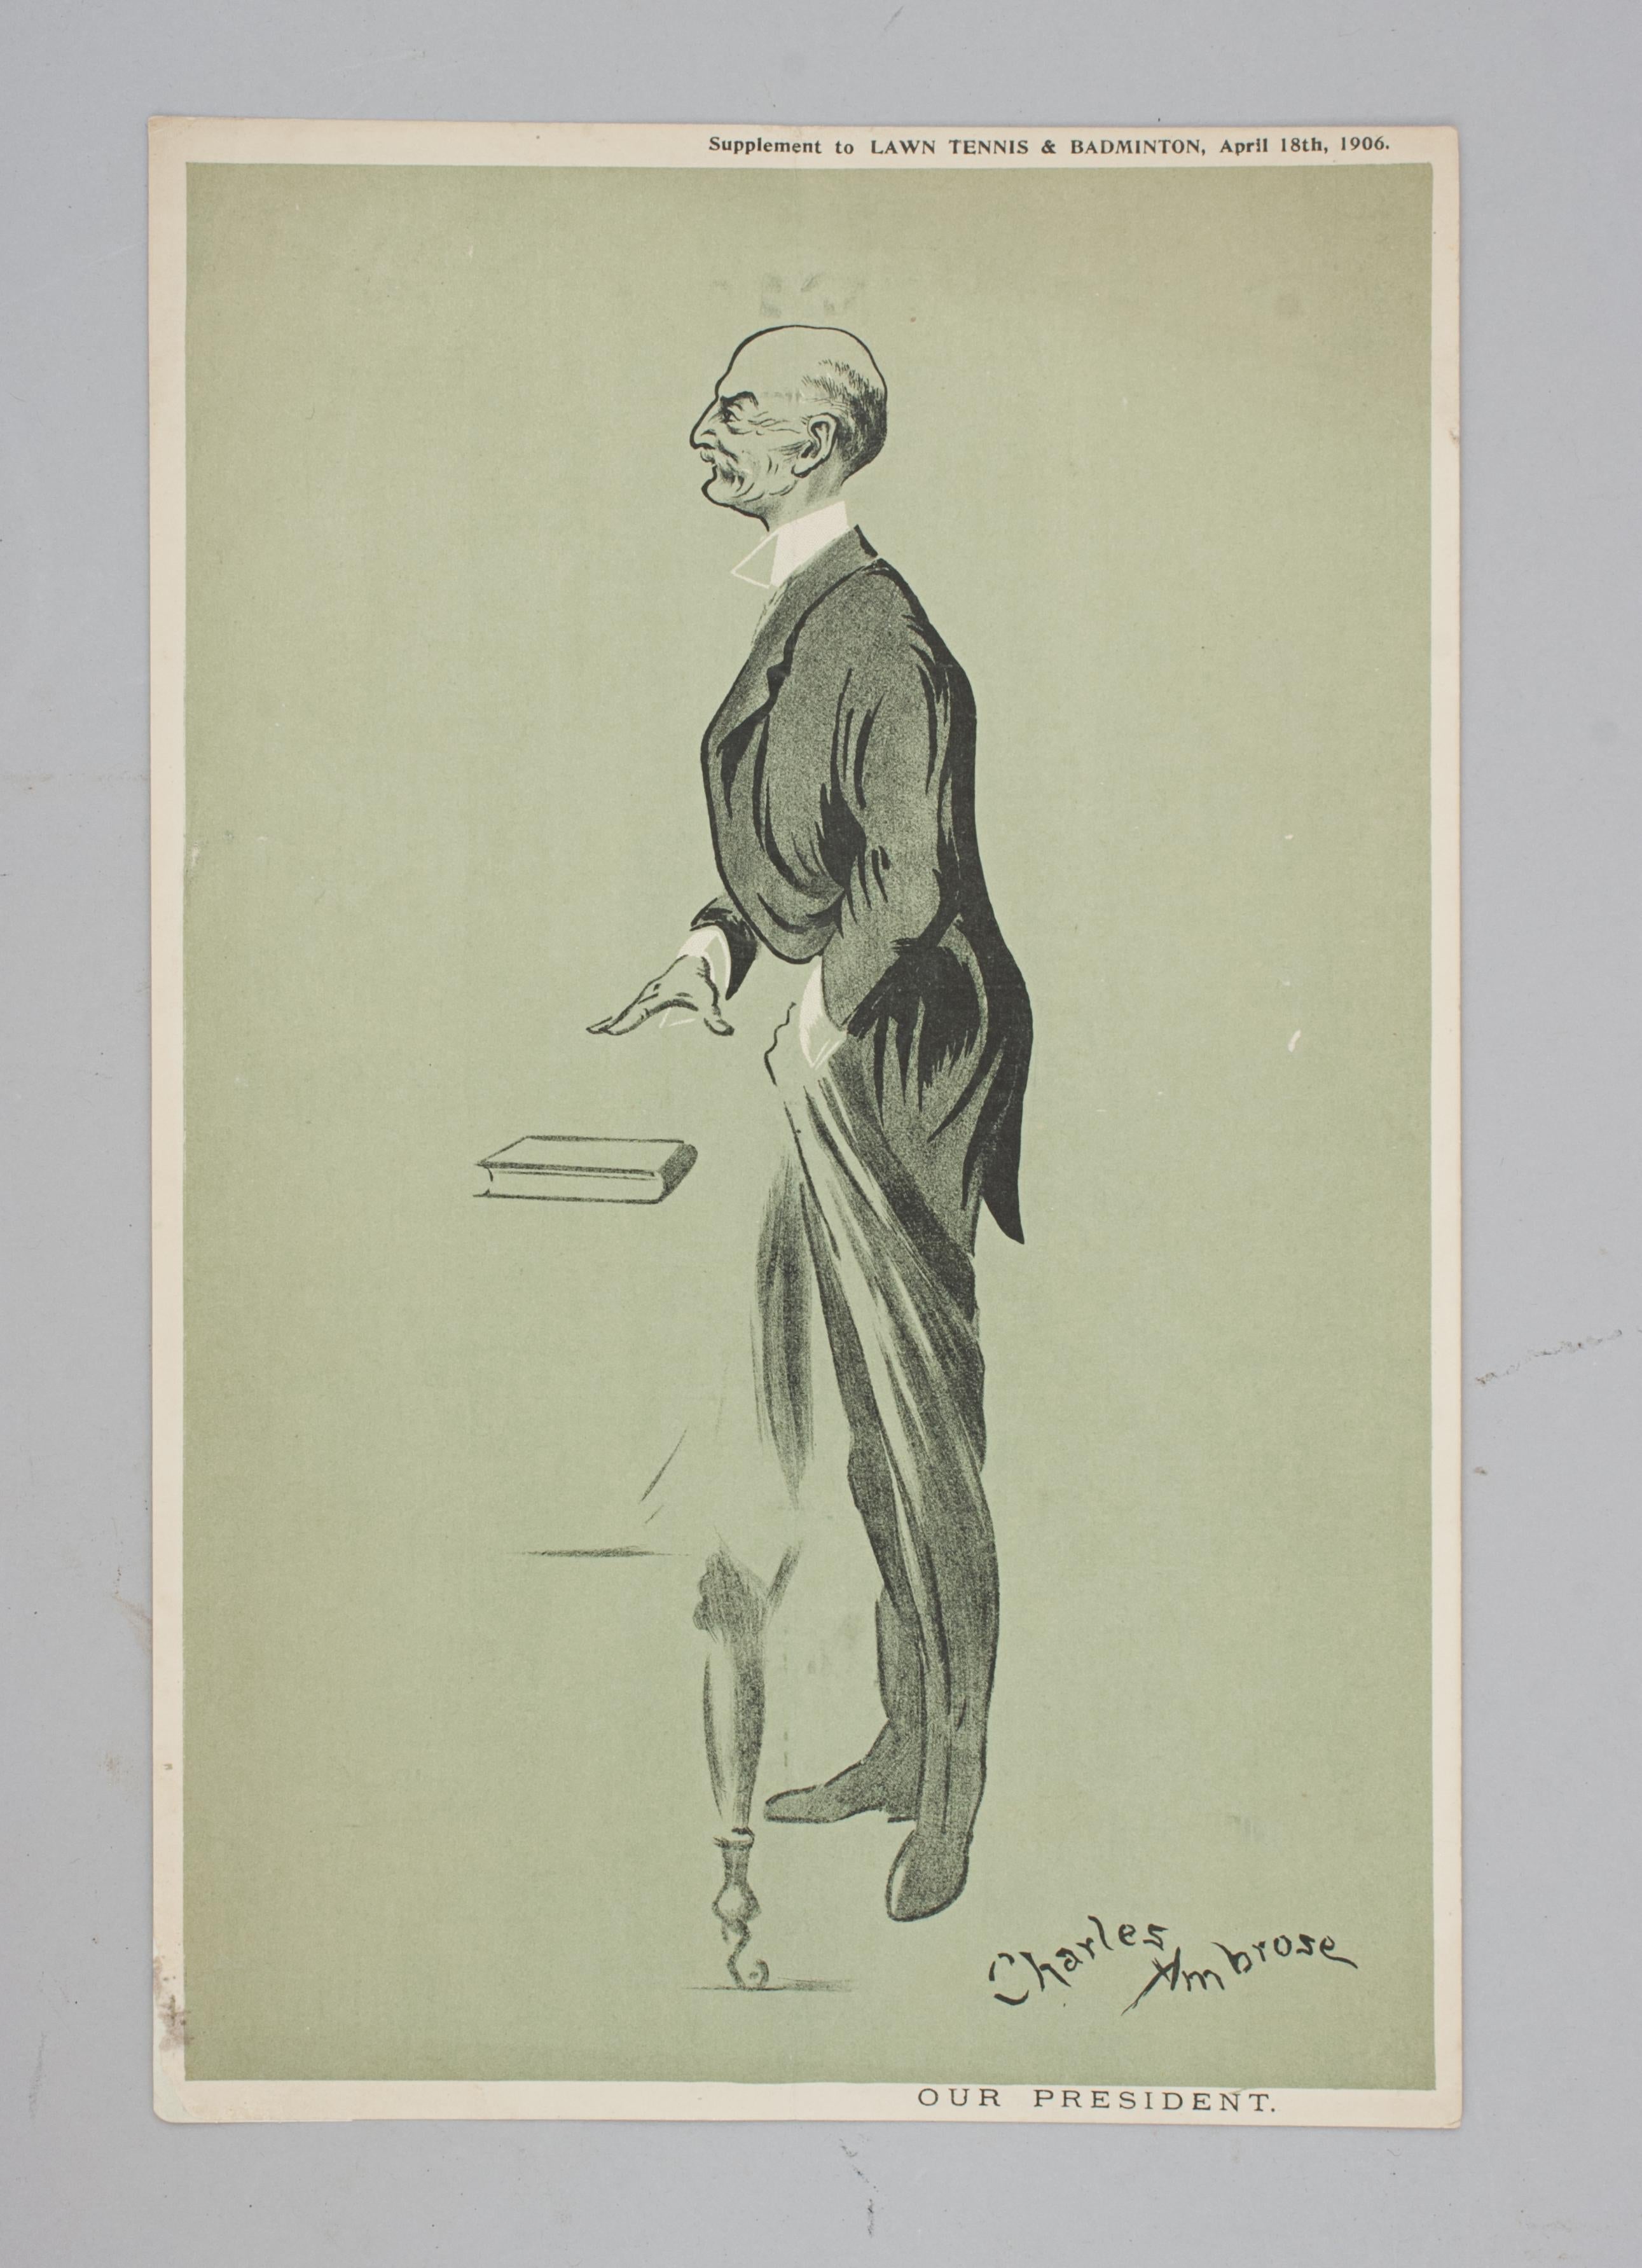 Collection of Ten Tennis Prints by Charles Ambrose For Sale 4